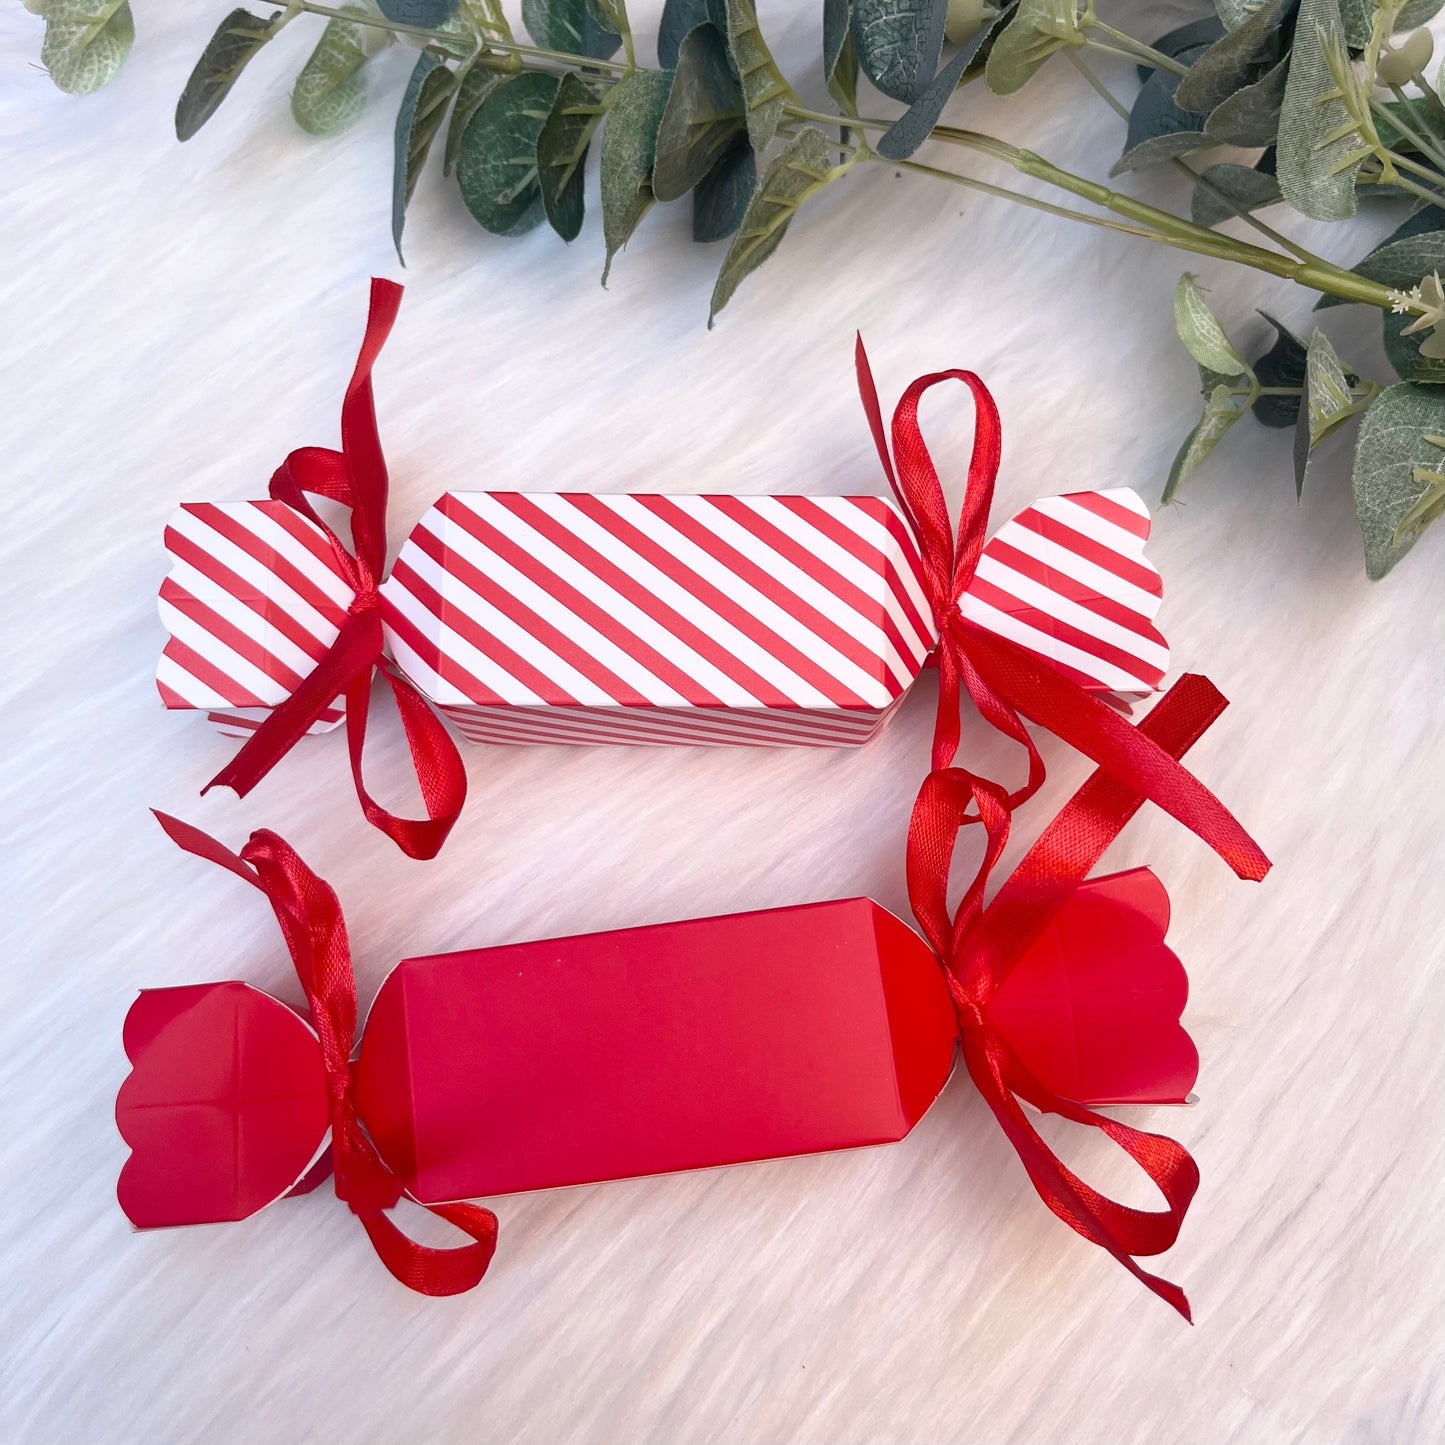 Christmas Cracker Gift Boxes - Pack of 50